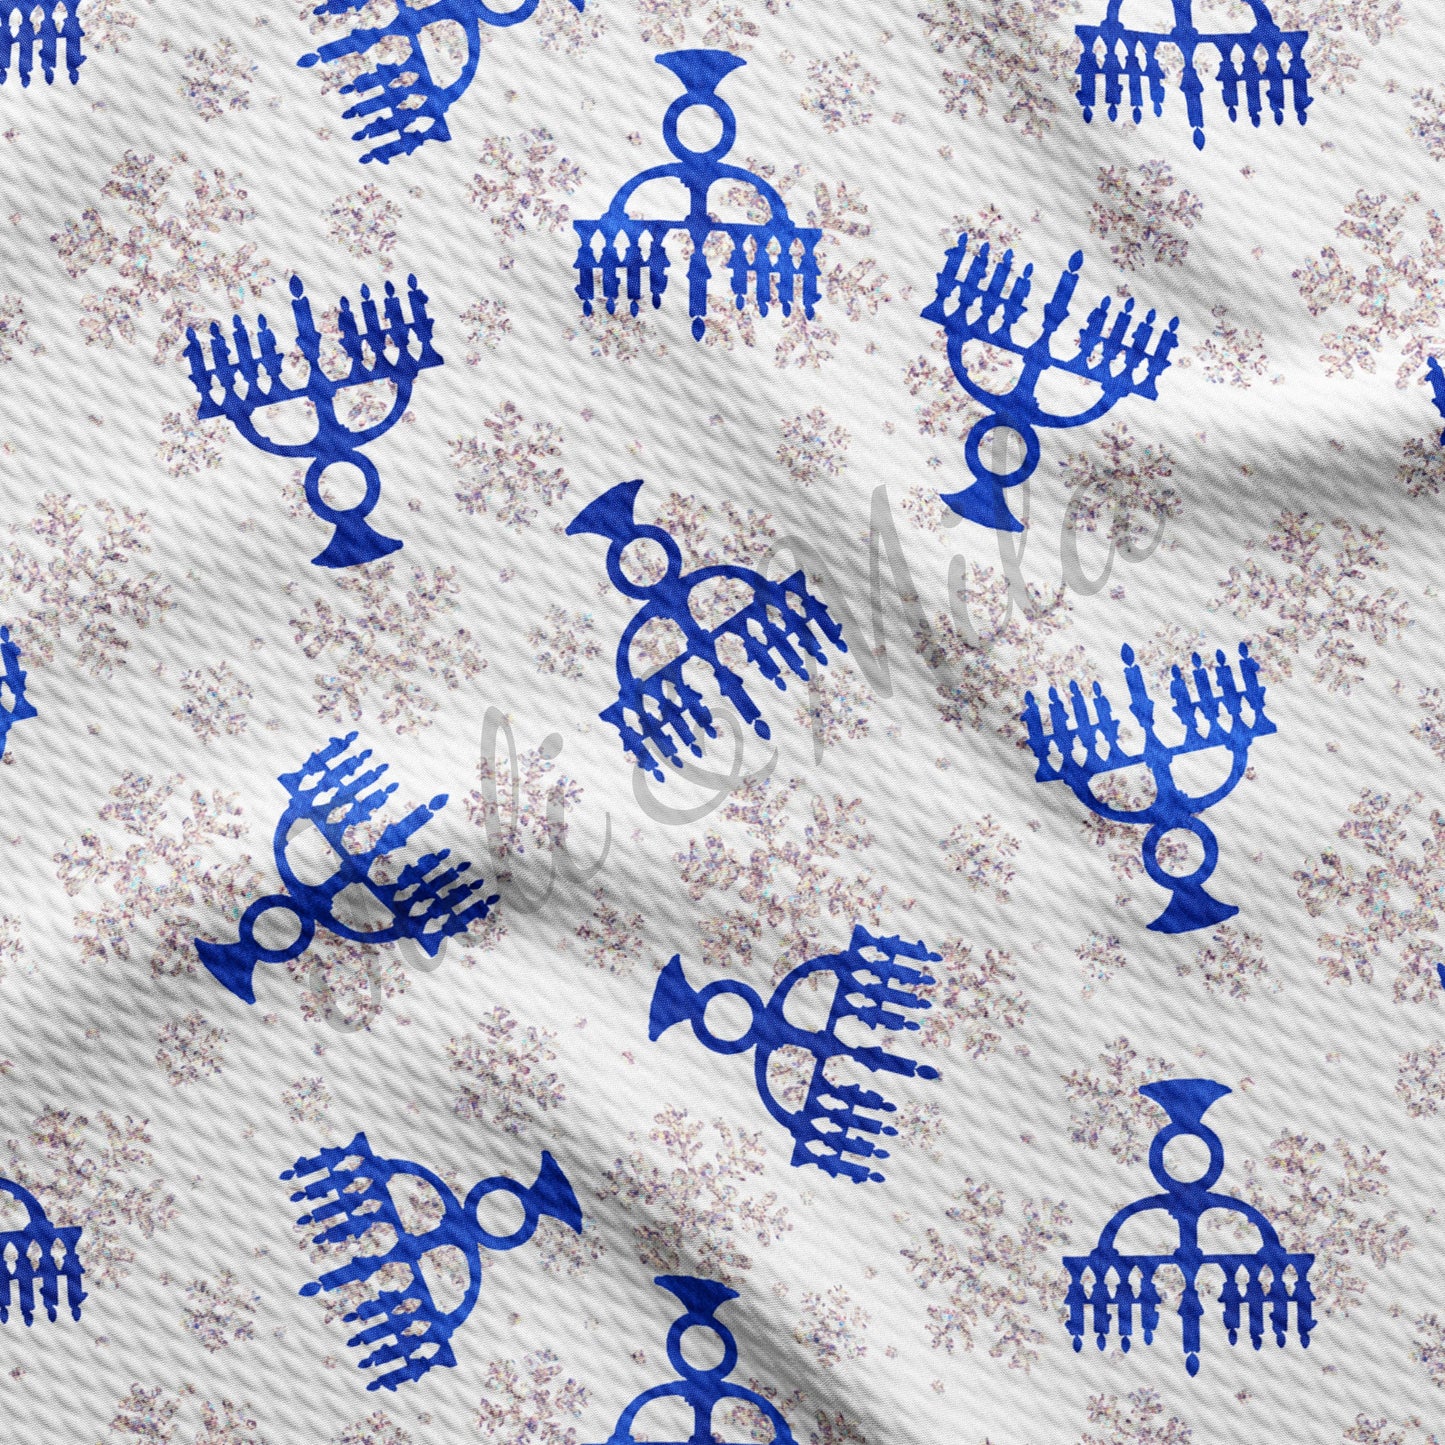 Hanukkah Liverpool Bullet Textured Fabric by the yard 4Way Stretch Solid Strip Thick Knit Jersey Liverpool Fabric christmaseries202